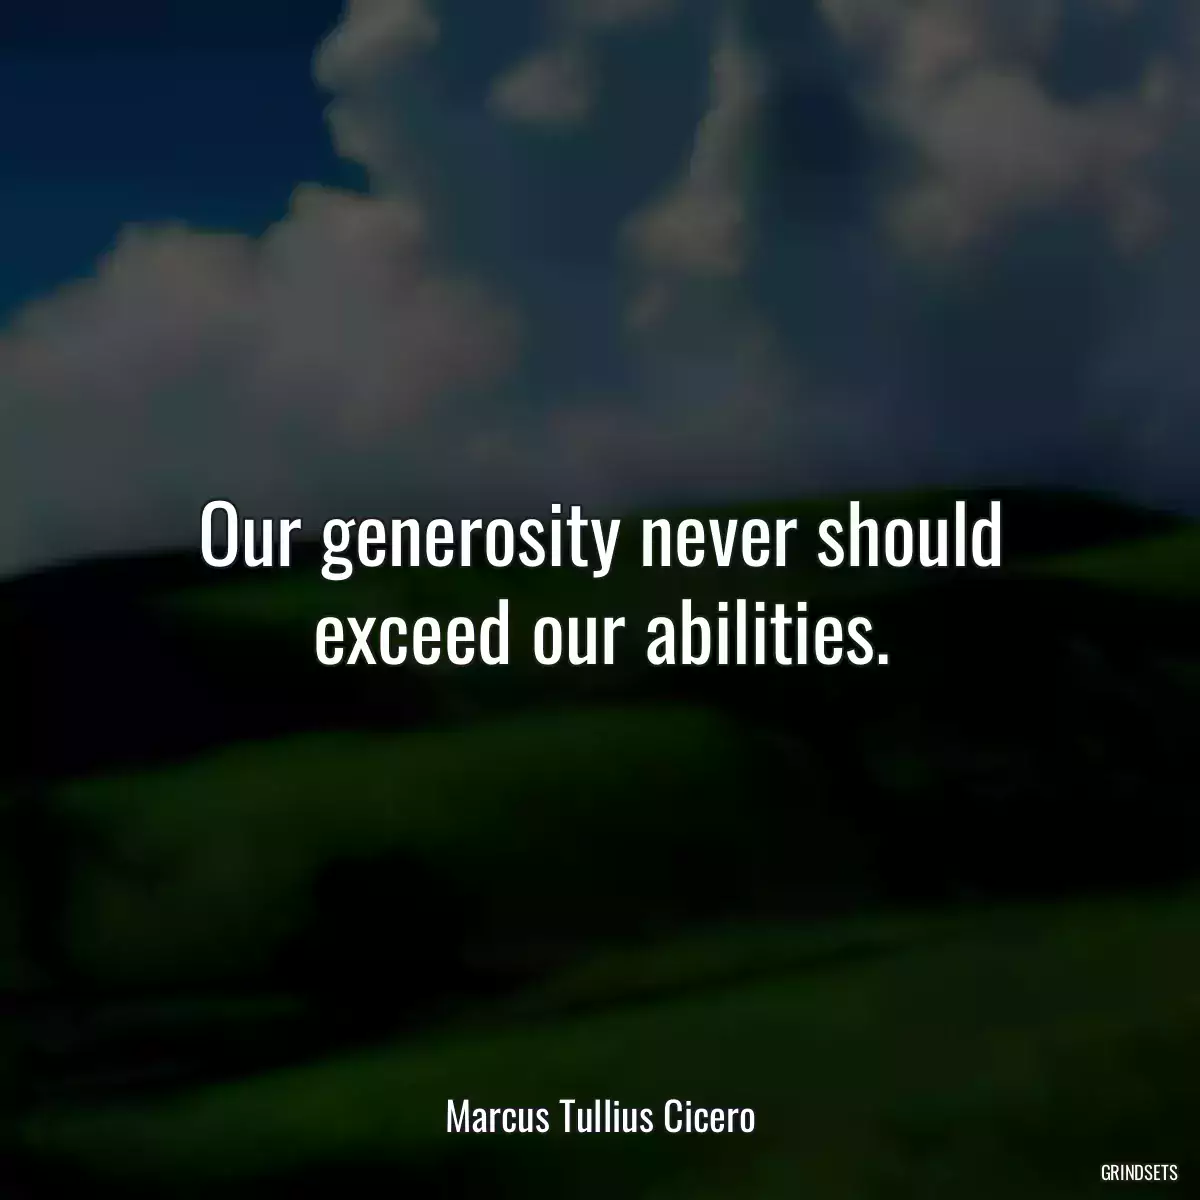 Our generosity never should exceed our abilities.